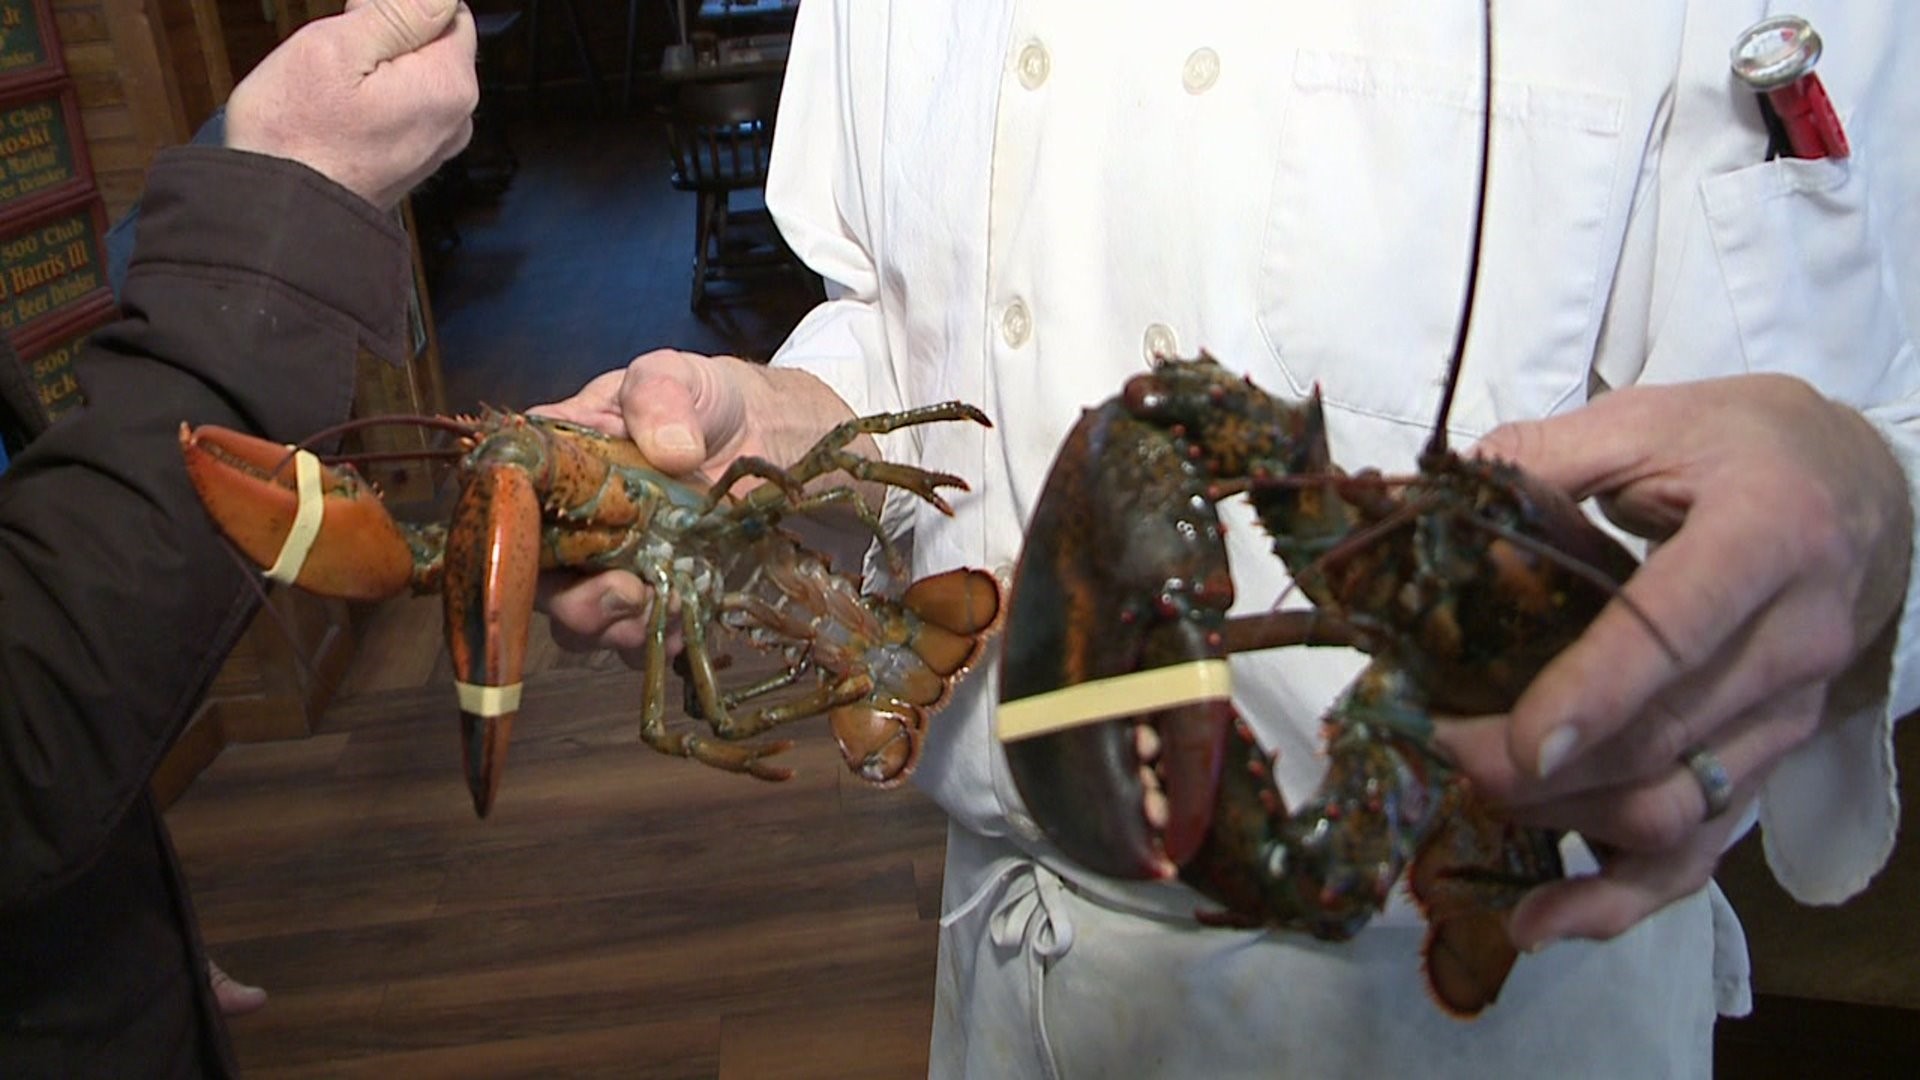 Wham Cam: Boiling Lobsters Alive?